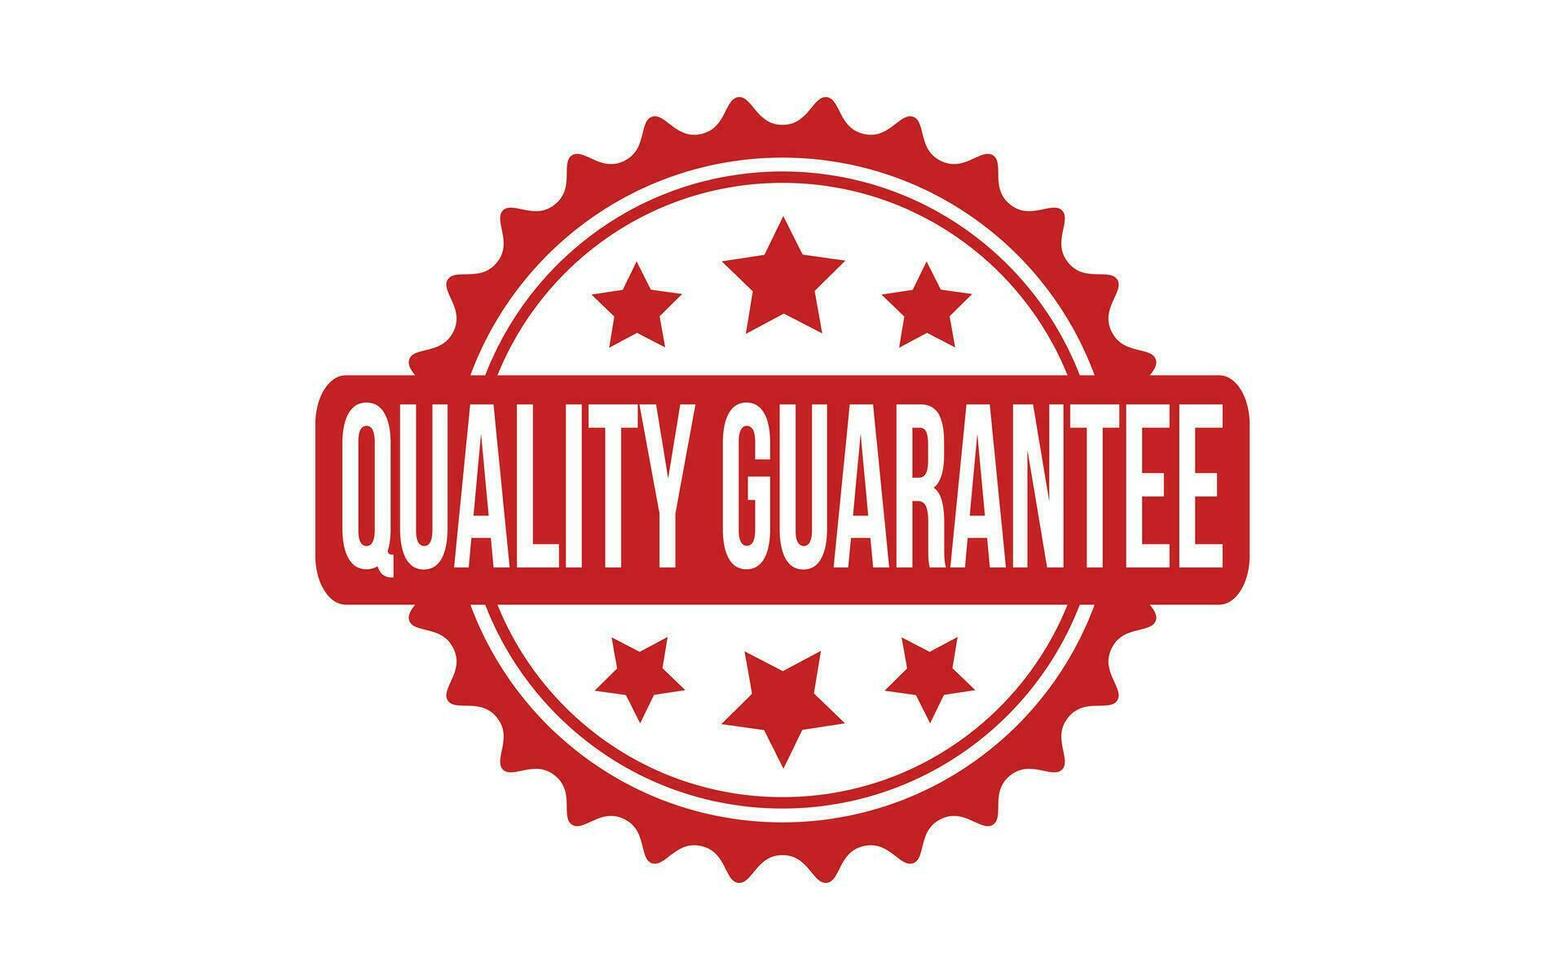 Quality Guarantee rubber grunge stamp seal vector